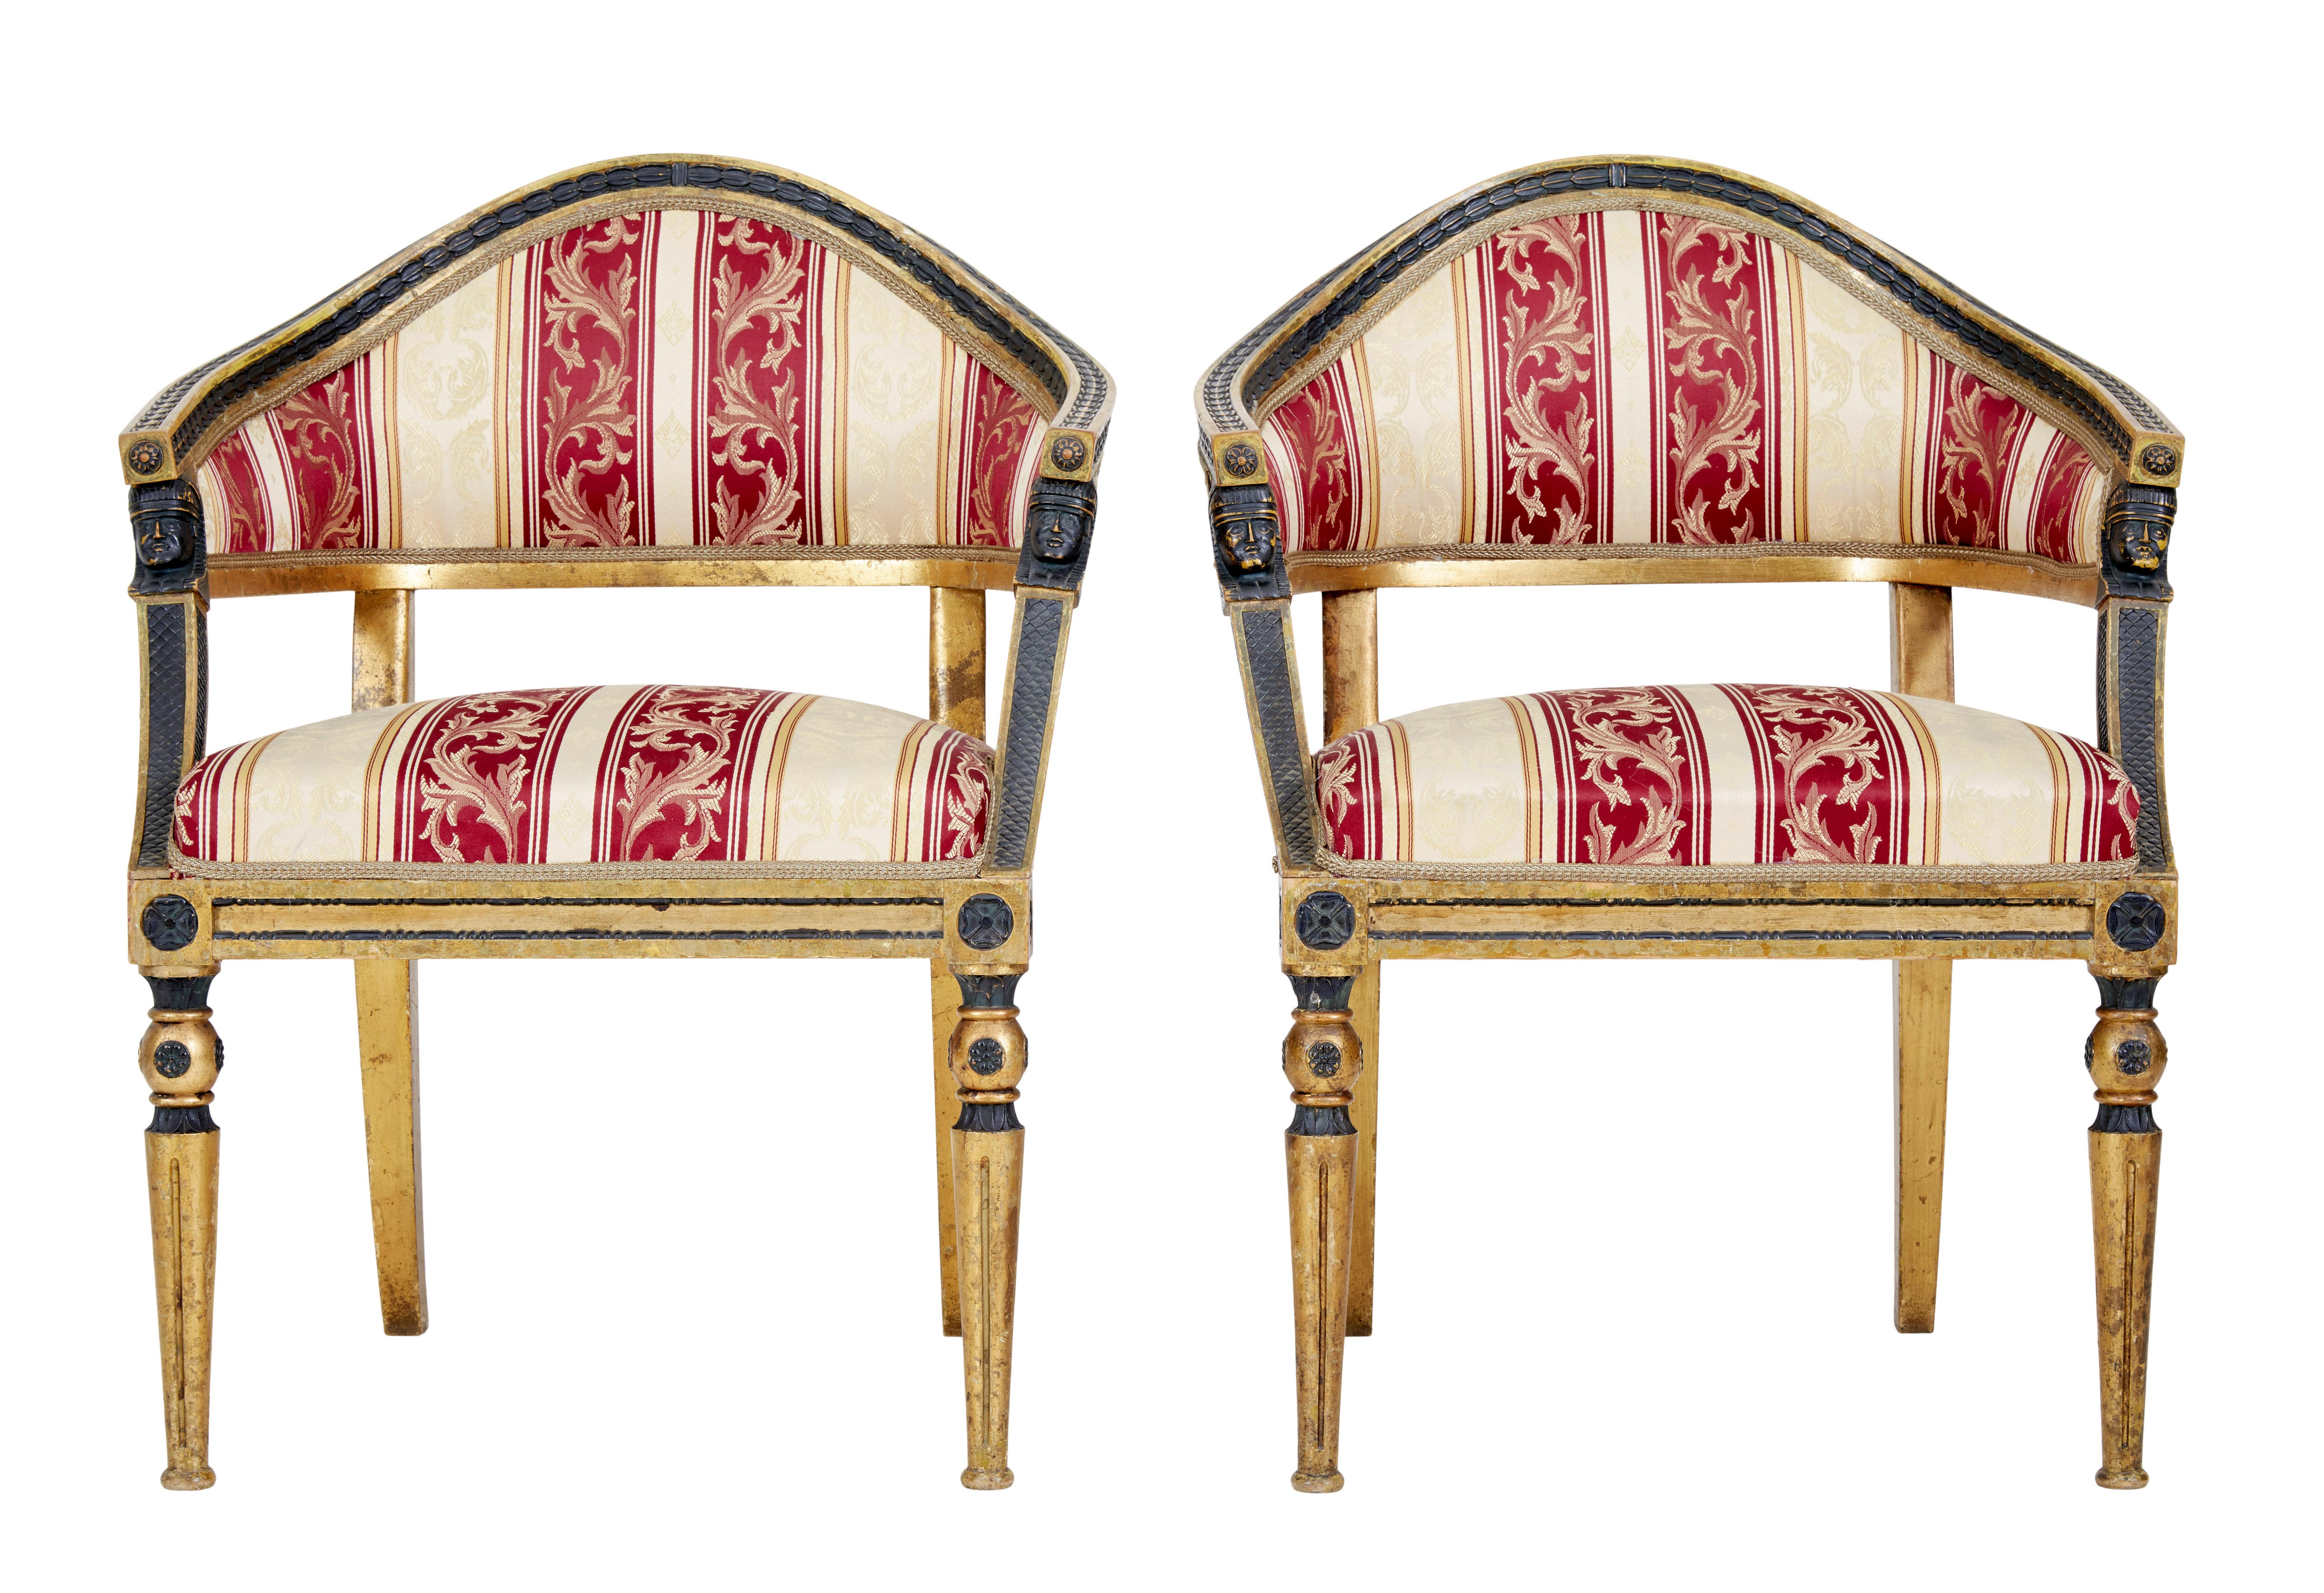 Pair of 19th century Swedish gilt and ebonised armchairs circa 1860.

Pair of fine quality shaped back gilt armchairs. Unusual shaped back with ebonised leaf detailing contrasting with the gilt. Egyptian revival mounts below the arms. Standing on